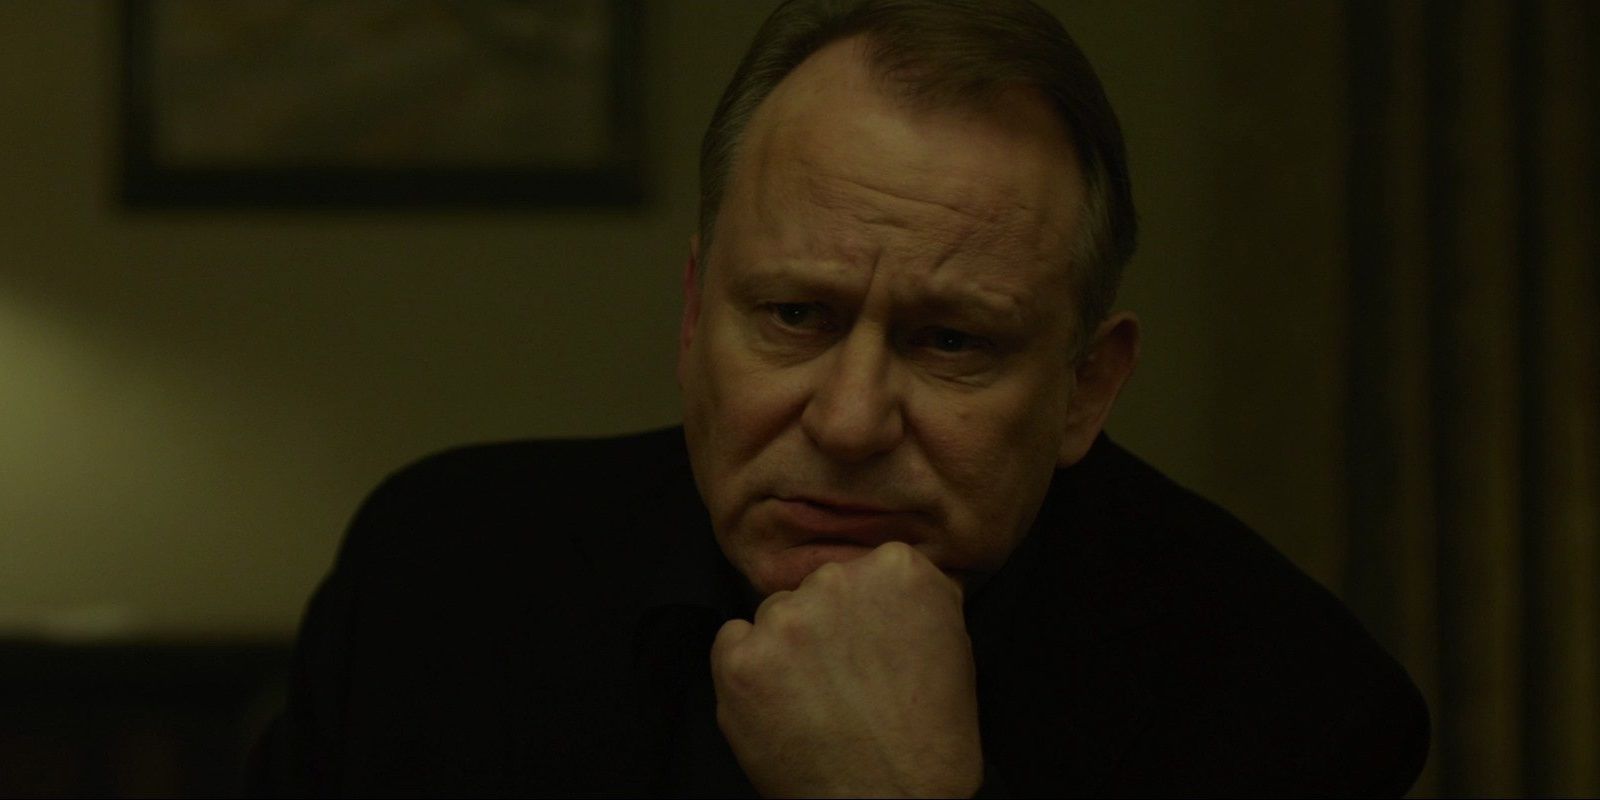 Stellan Skarsgard leaning on his hand in The Girl with the Dragon Tattoo